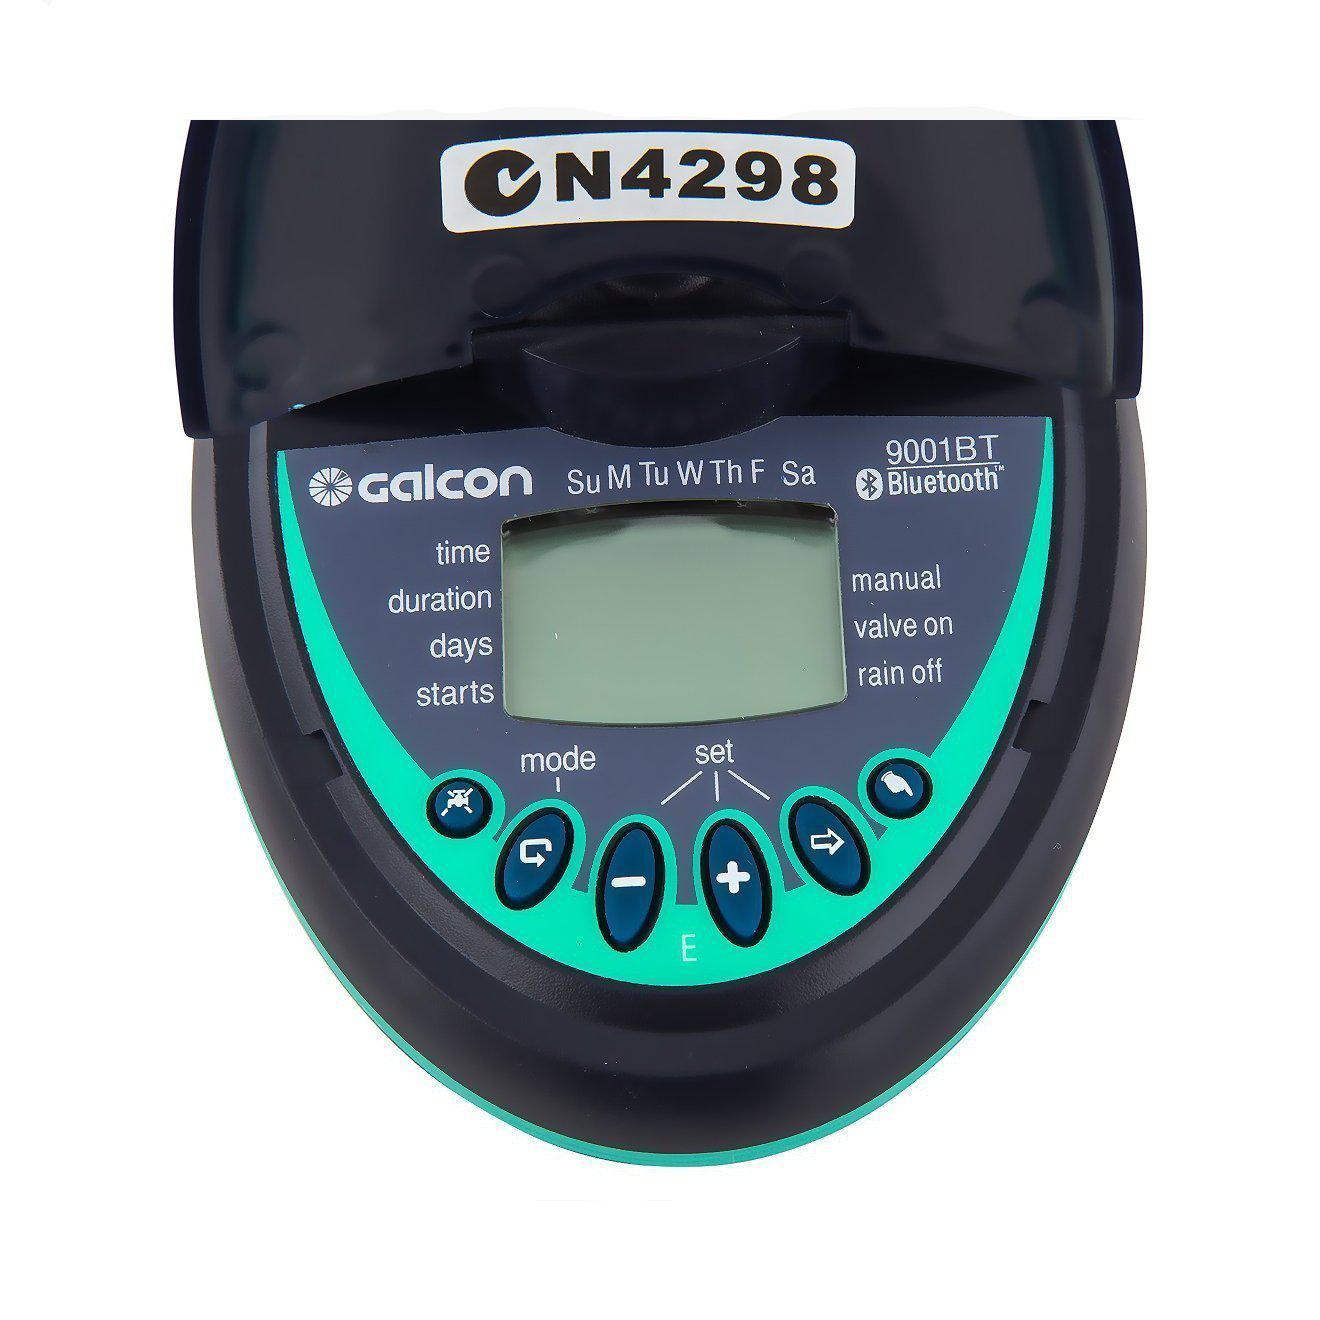 galcon bluetooth flip open lcd timer